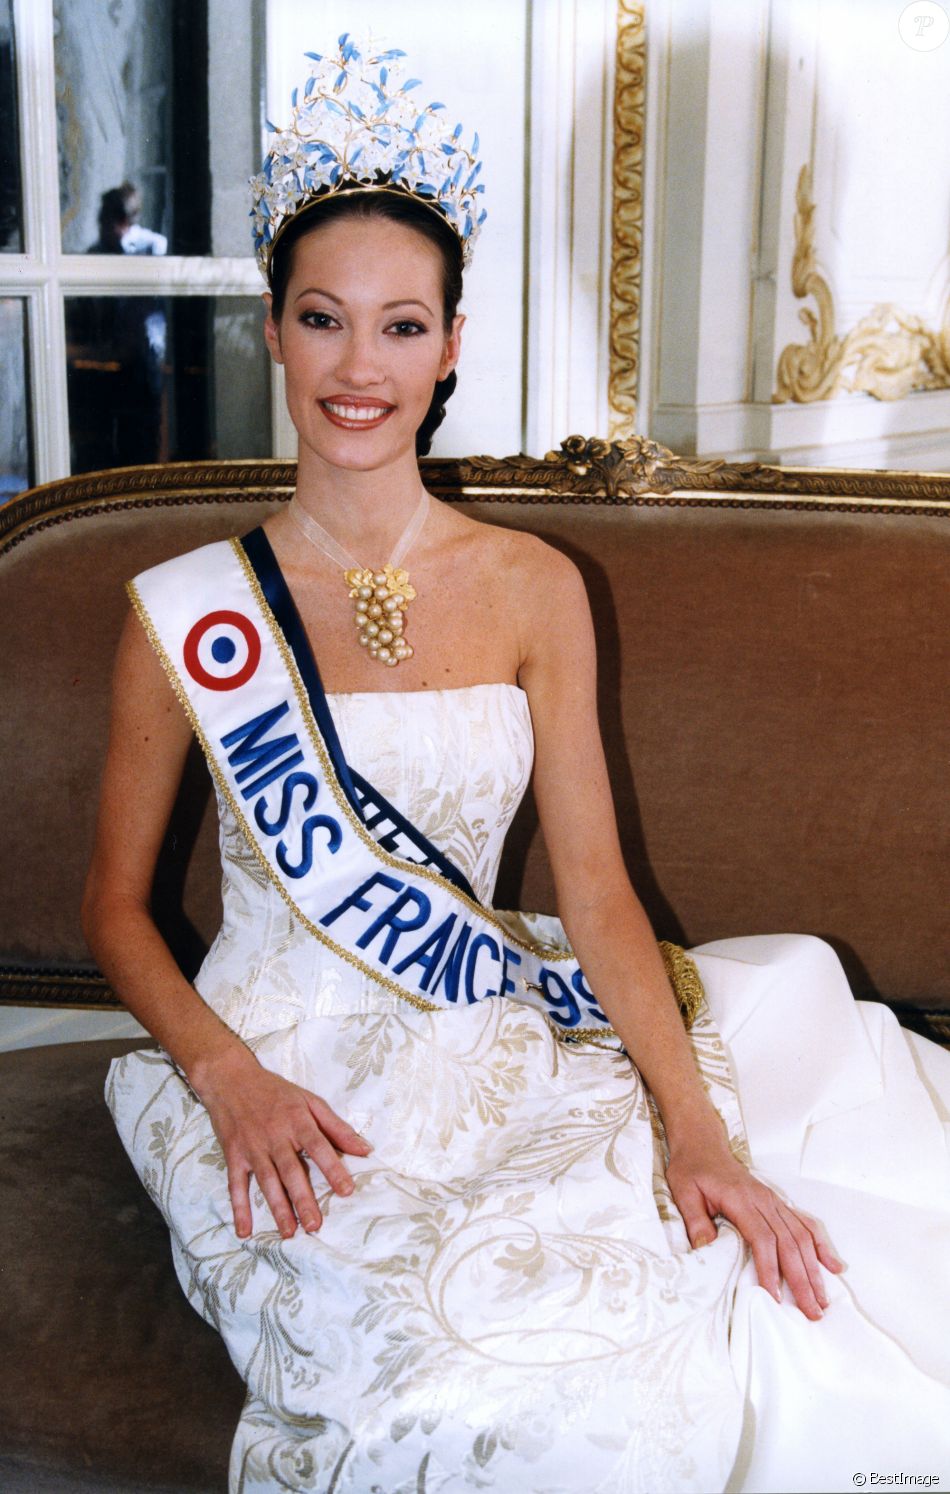 https://static1.purepeople.com/articles/1/37/26/71/@/5378171-archives-mareva-galanter-miss-france-950x0-3.jpg